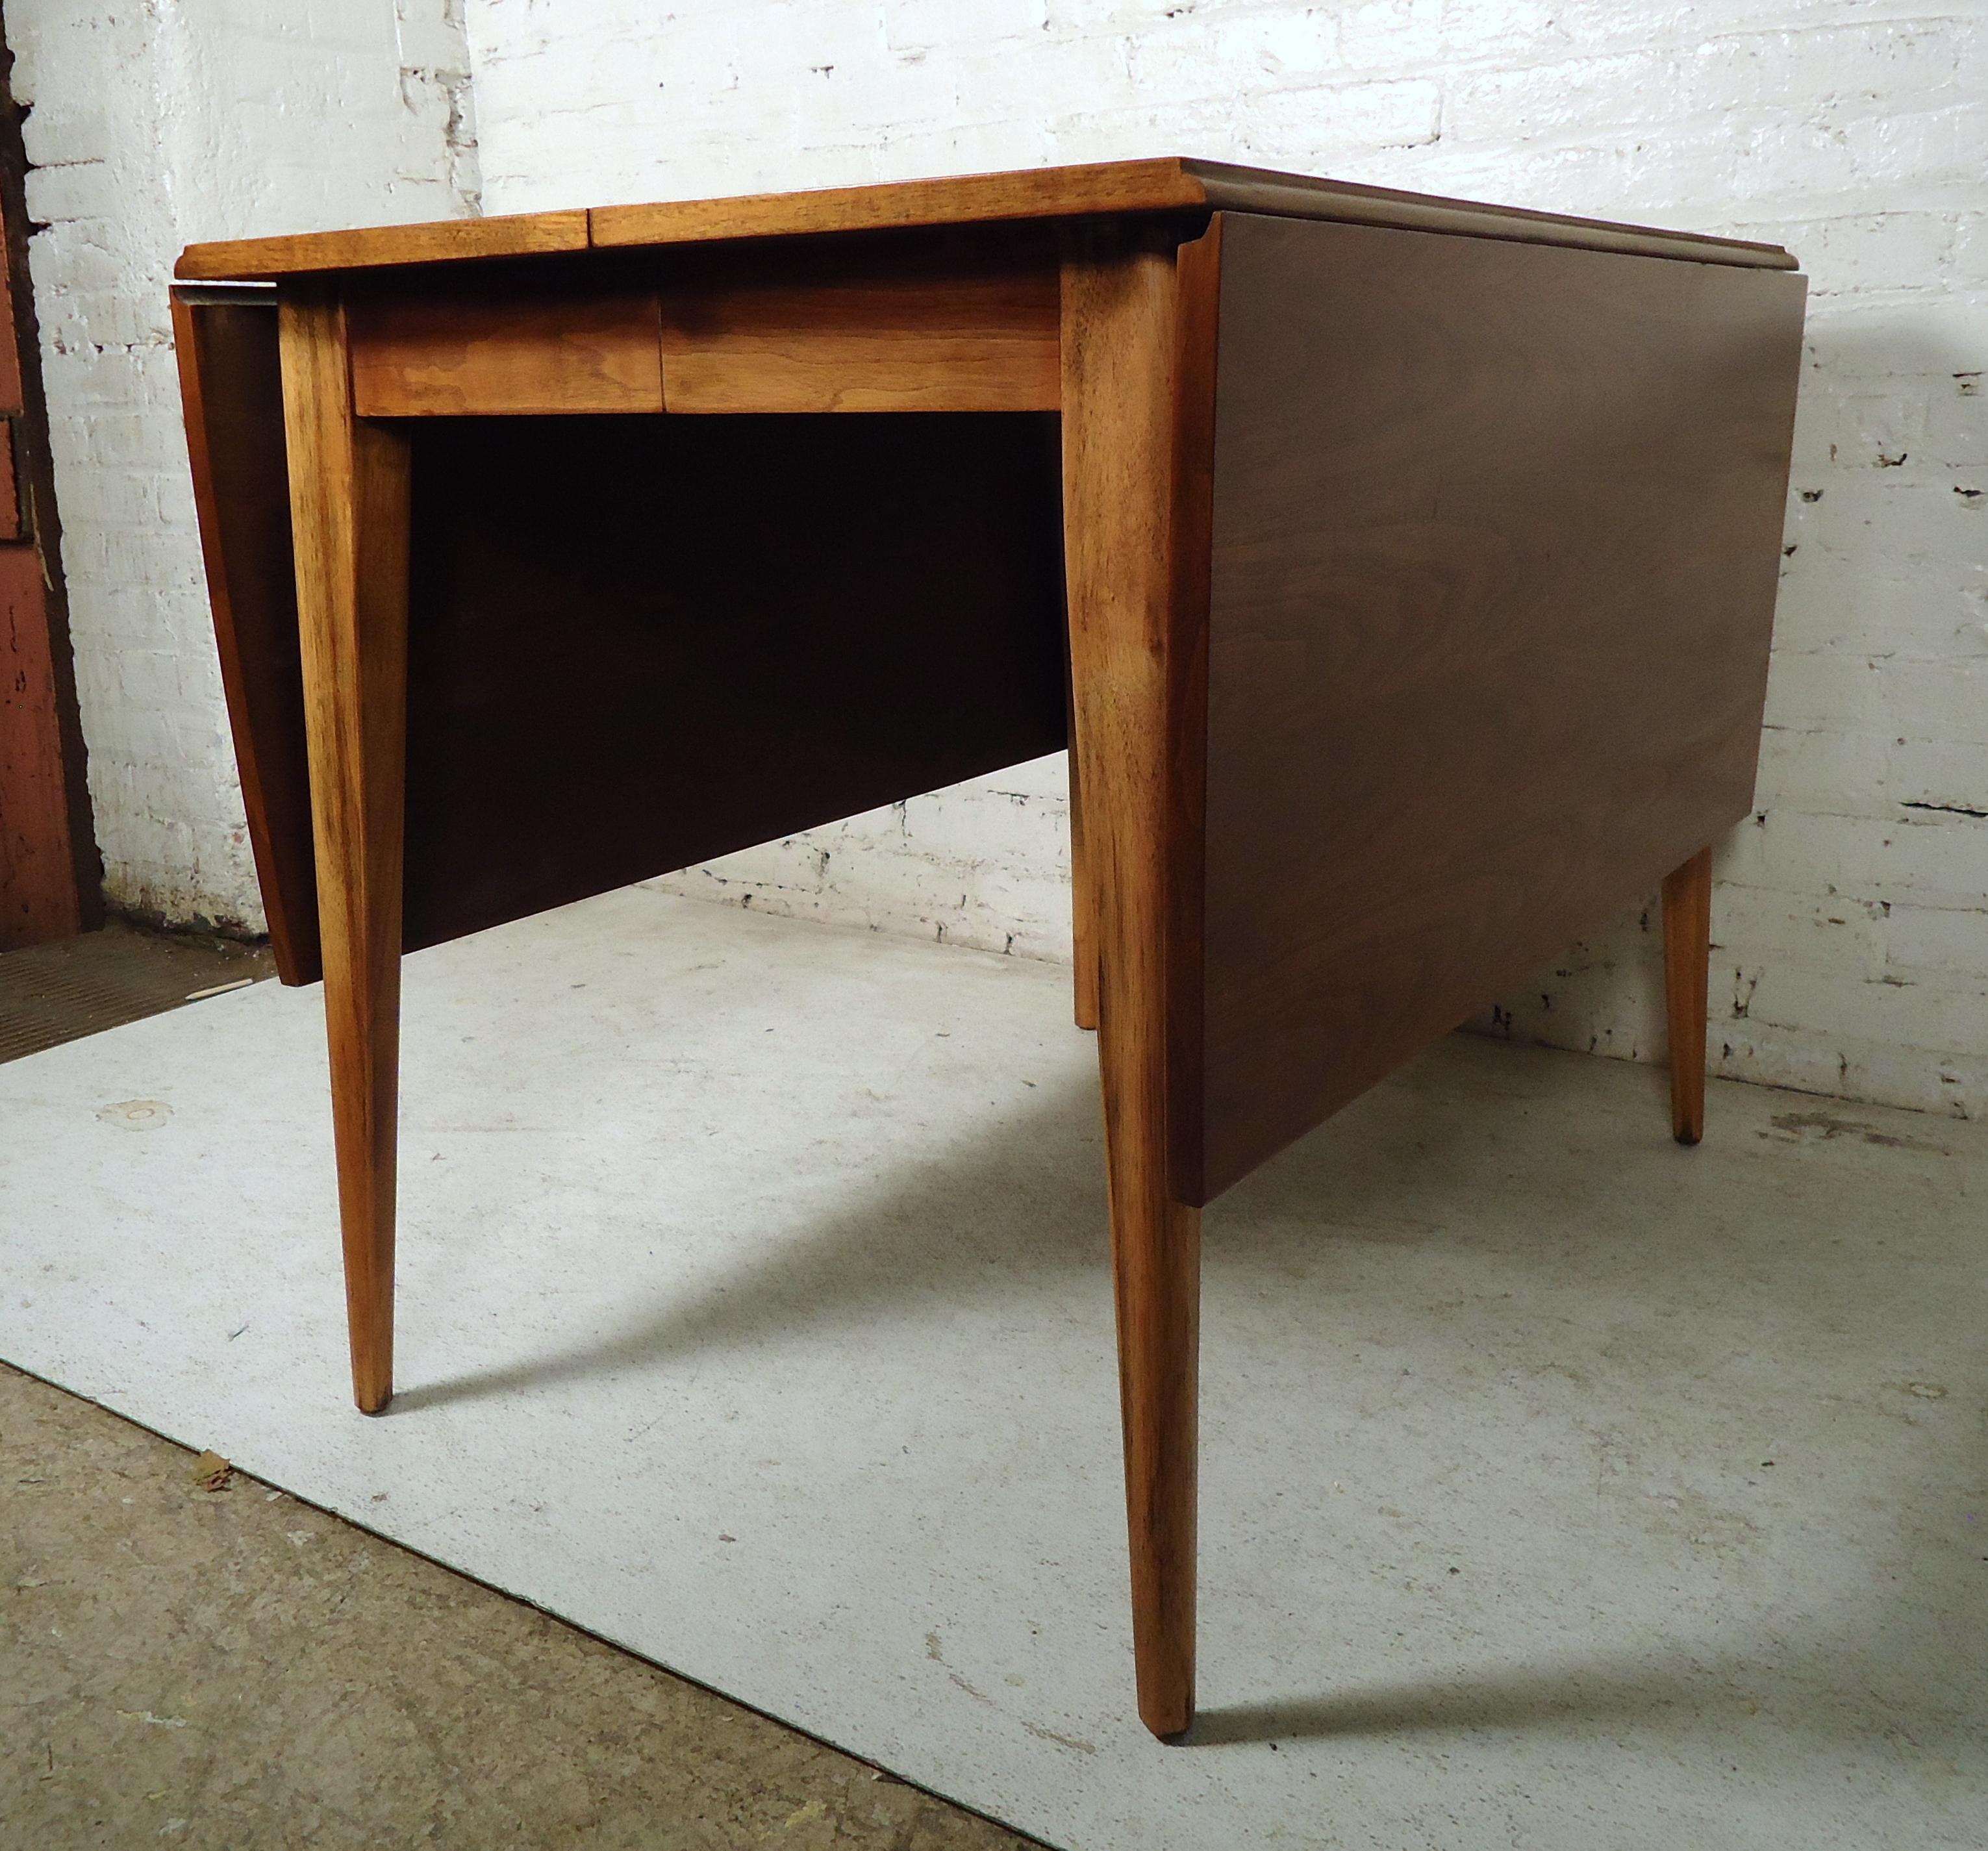 Vintage modern drop-leaf table featuring rich walnut wood grain, two leaves expand the table from 28